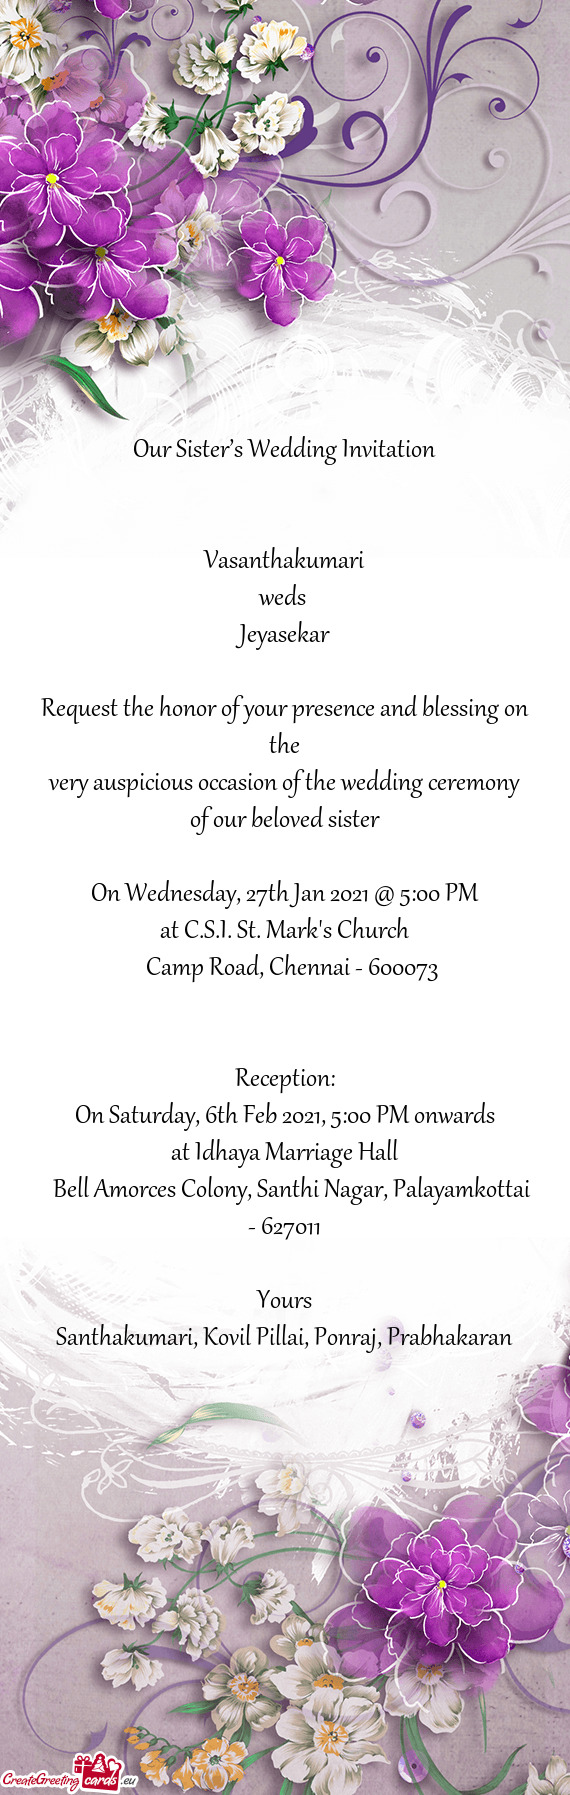 Our Sister’s Wedding Invitation